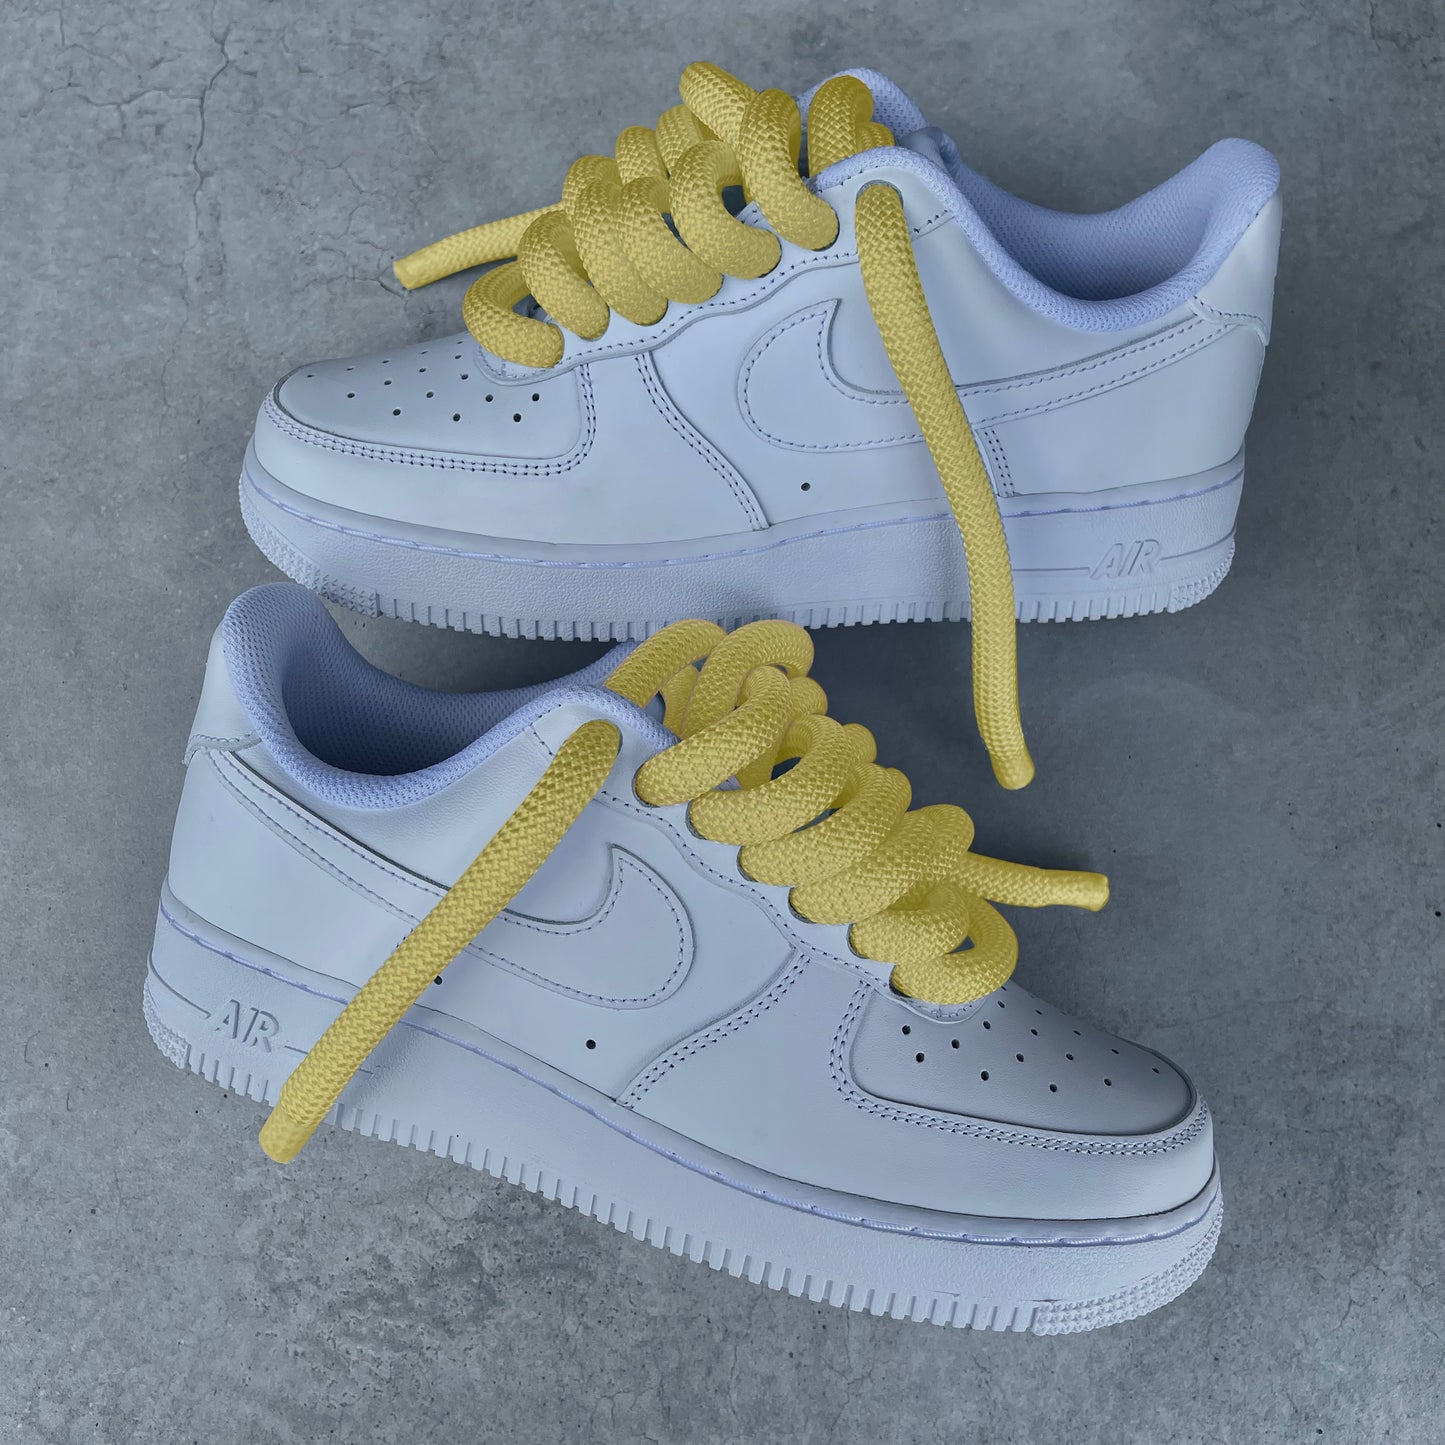 Custom AIR FORCE 1 - Rope laces 2.0 (yellow)